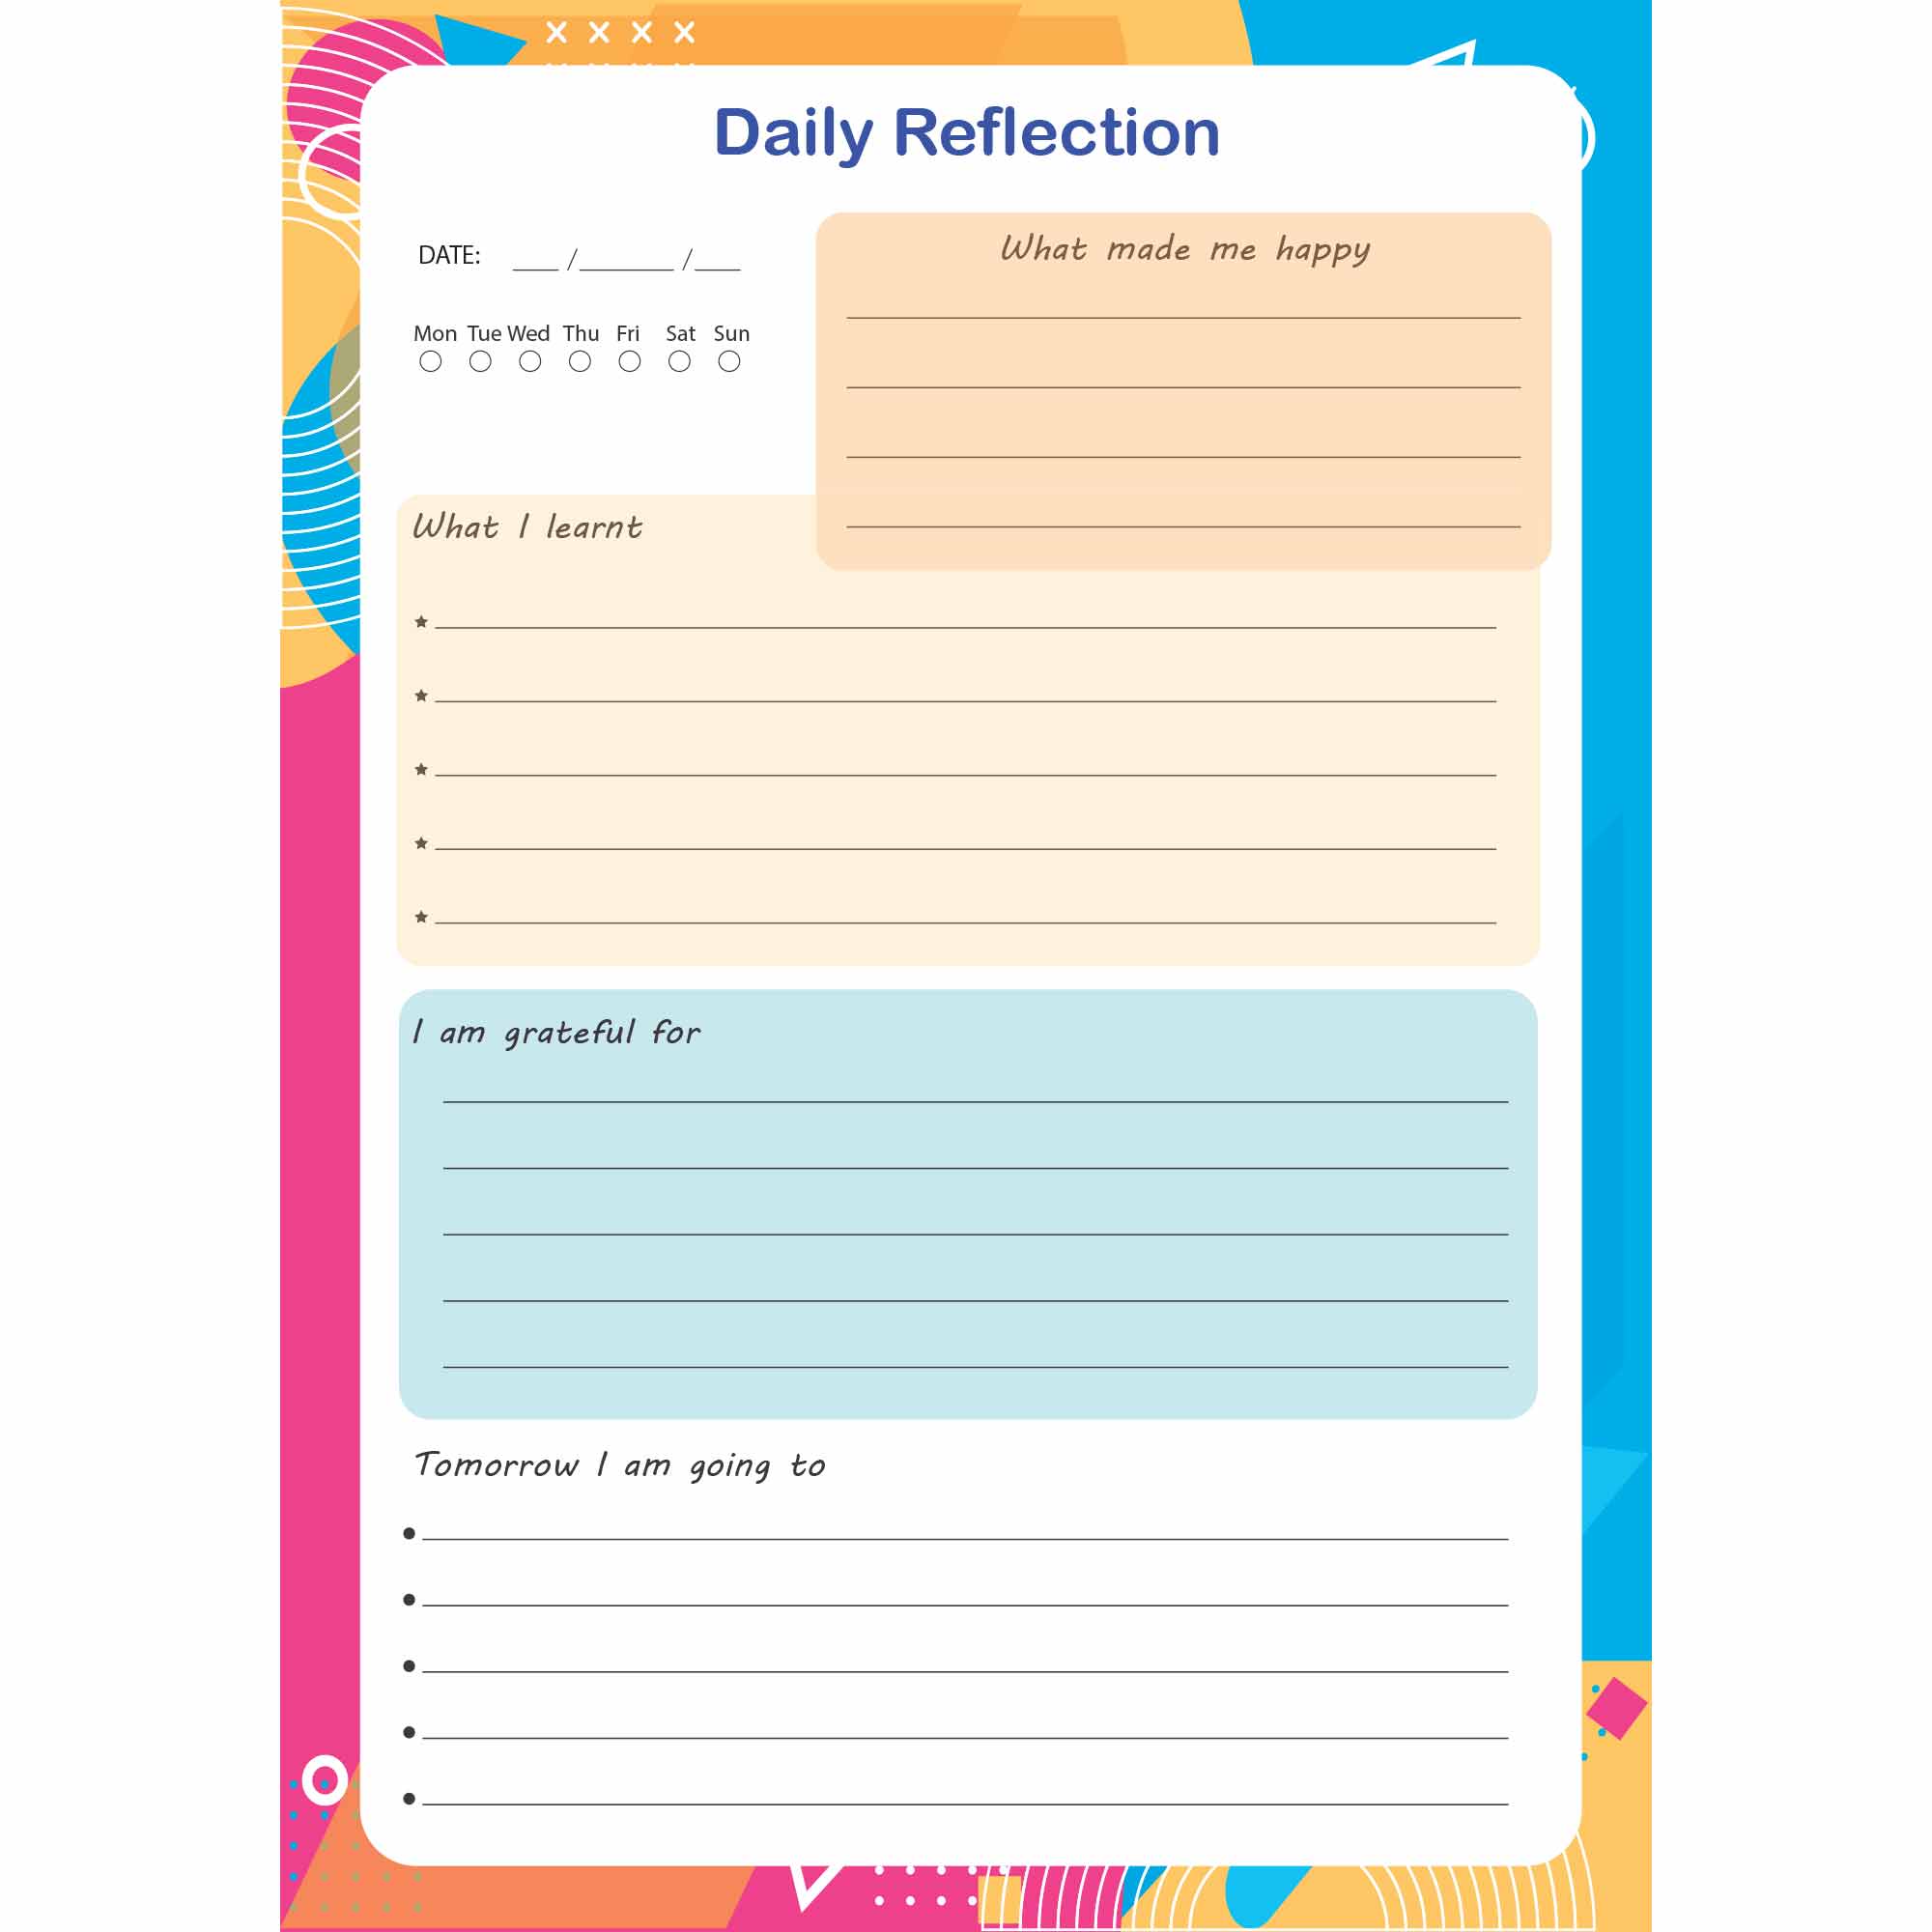 travel daily journal template